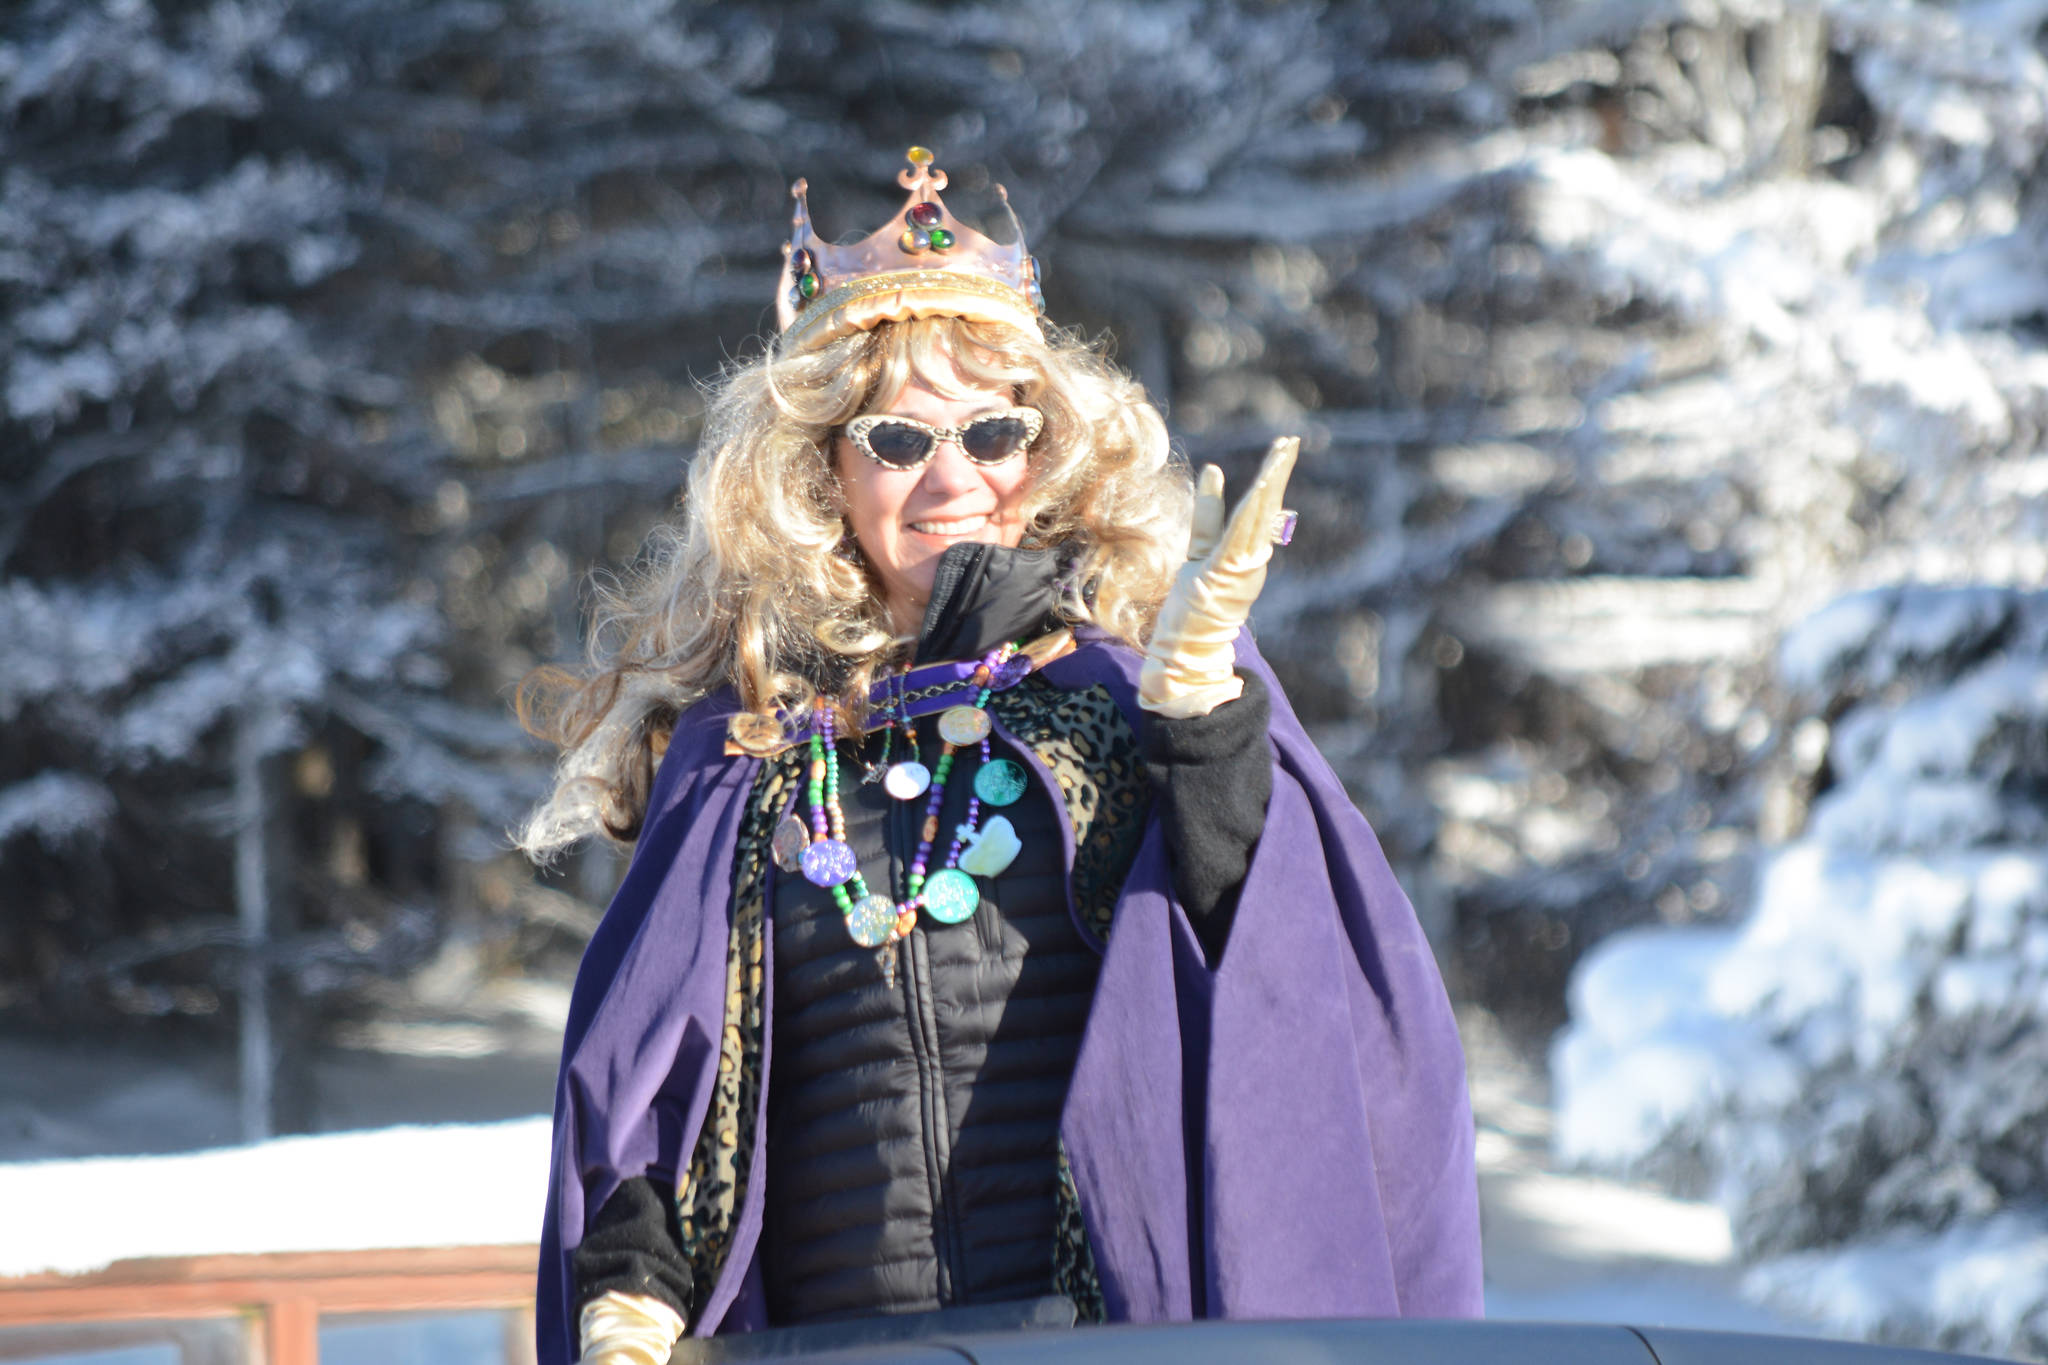 Parade Marshal Queen Krewe of Gambrinus Hilda Caraballo waves at the crowd at the 2017 Homer Winter Carnival Parade on Saturday. (Photo by Michael Armstrong, Homer News)